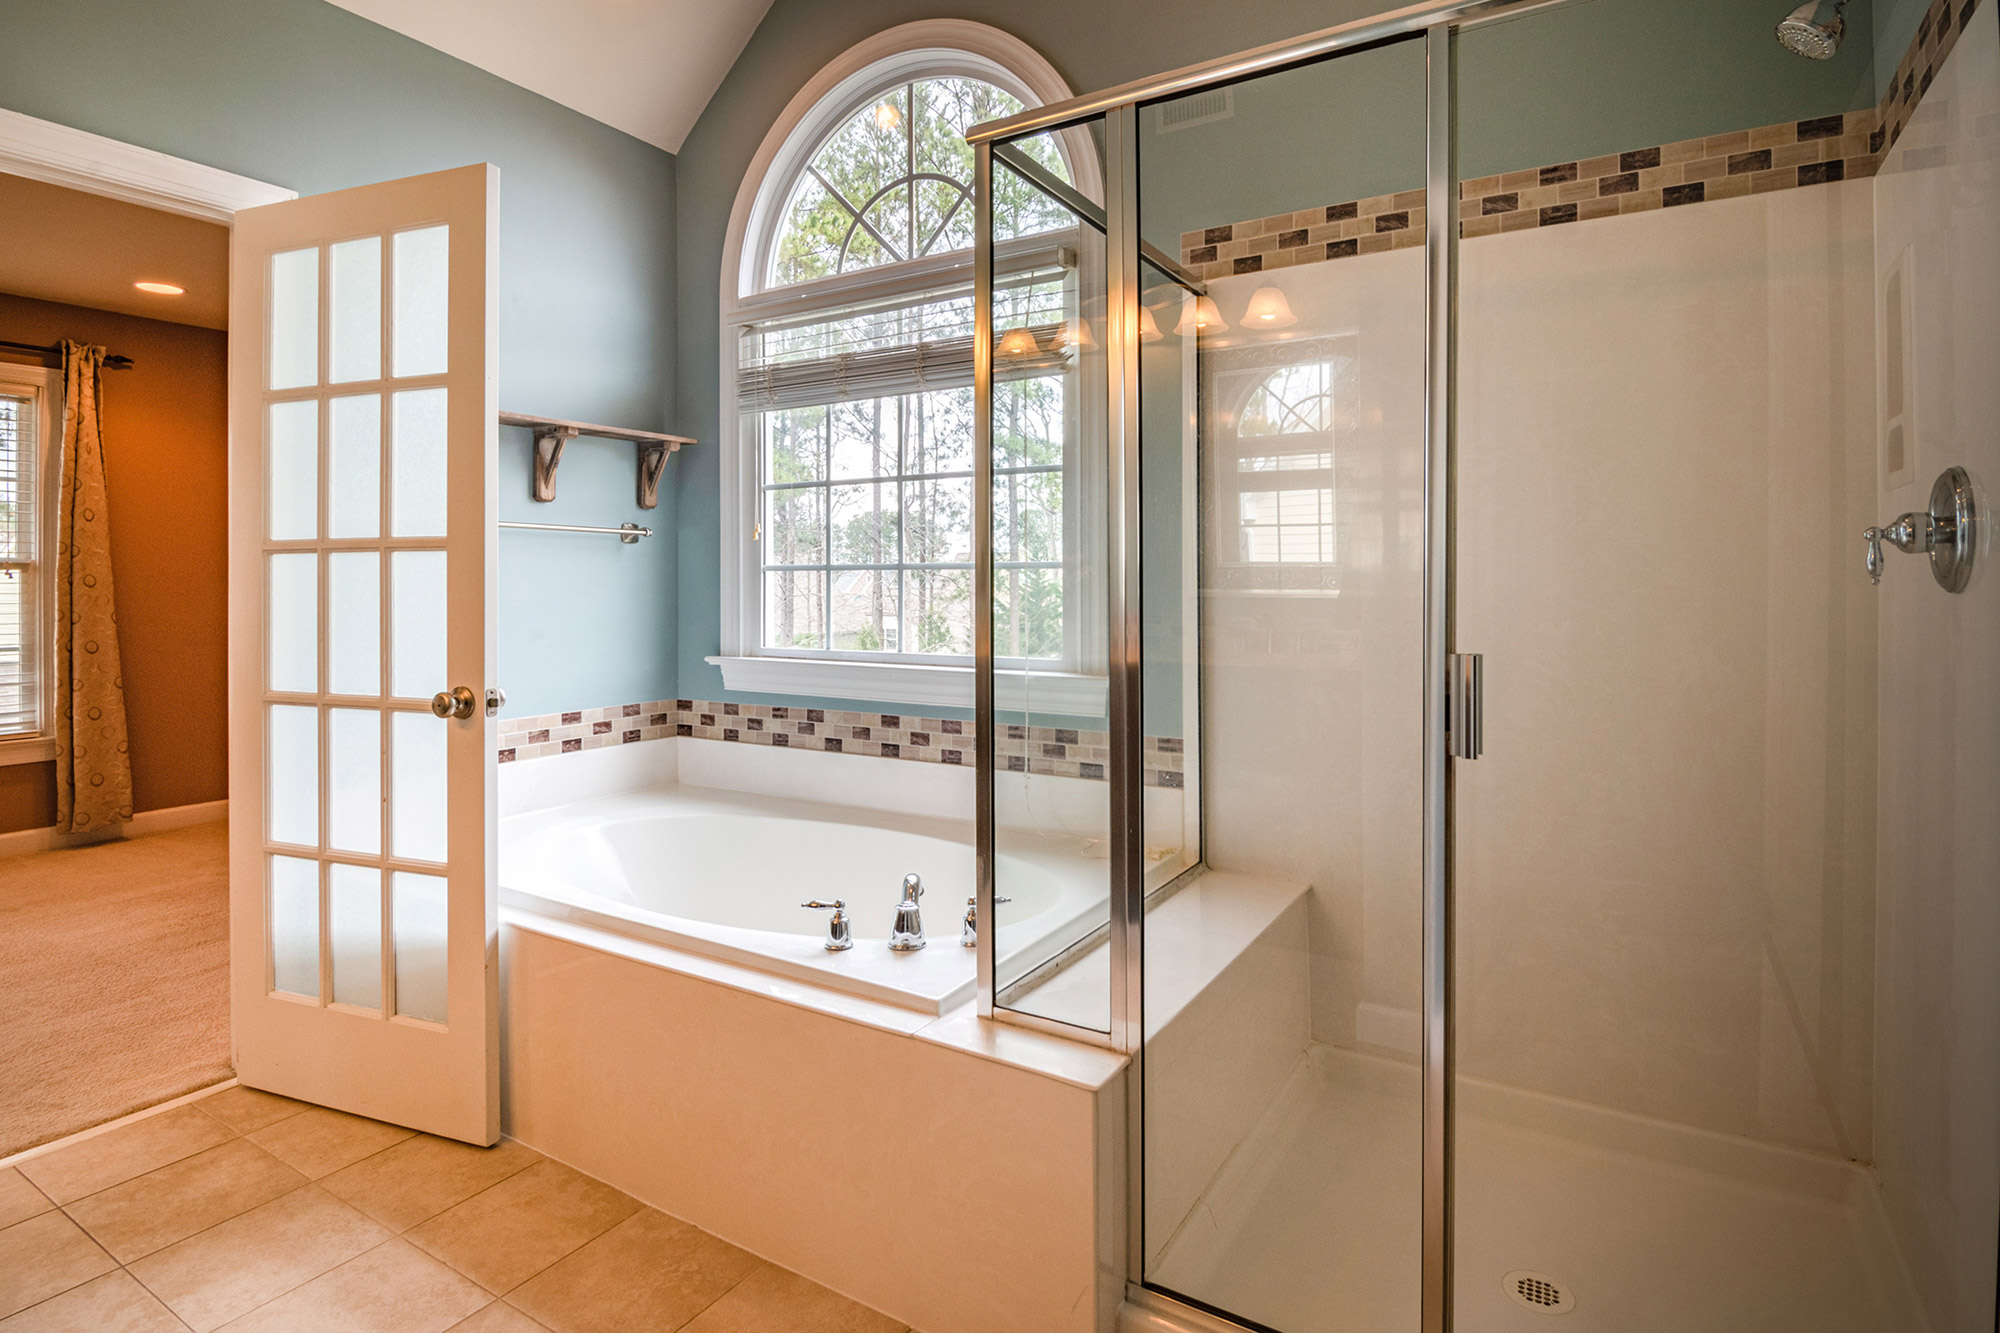 How to Clean Glass Shower Doors and Keep Them Clean